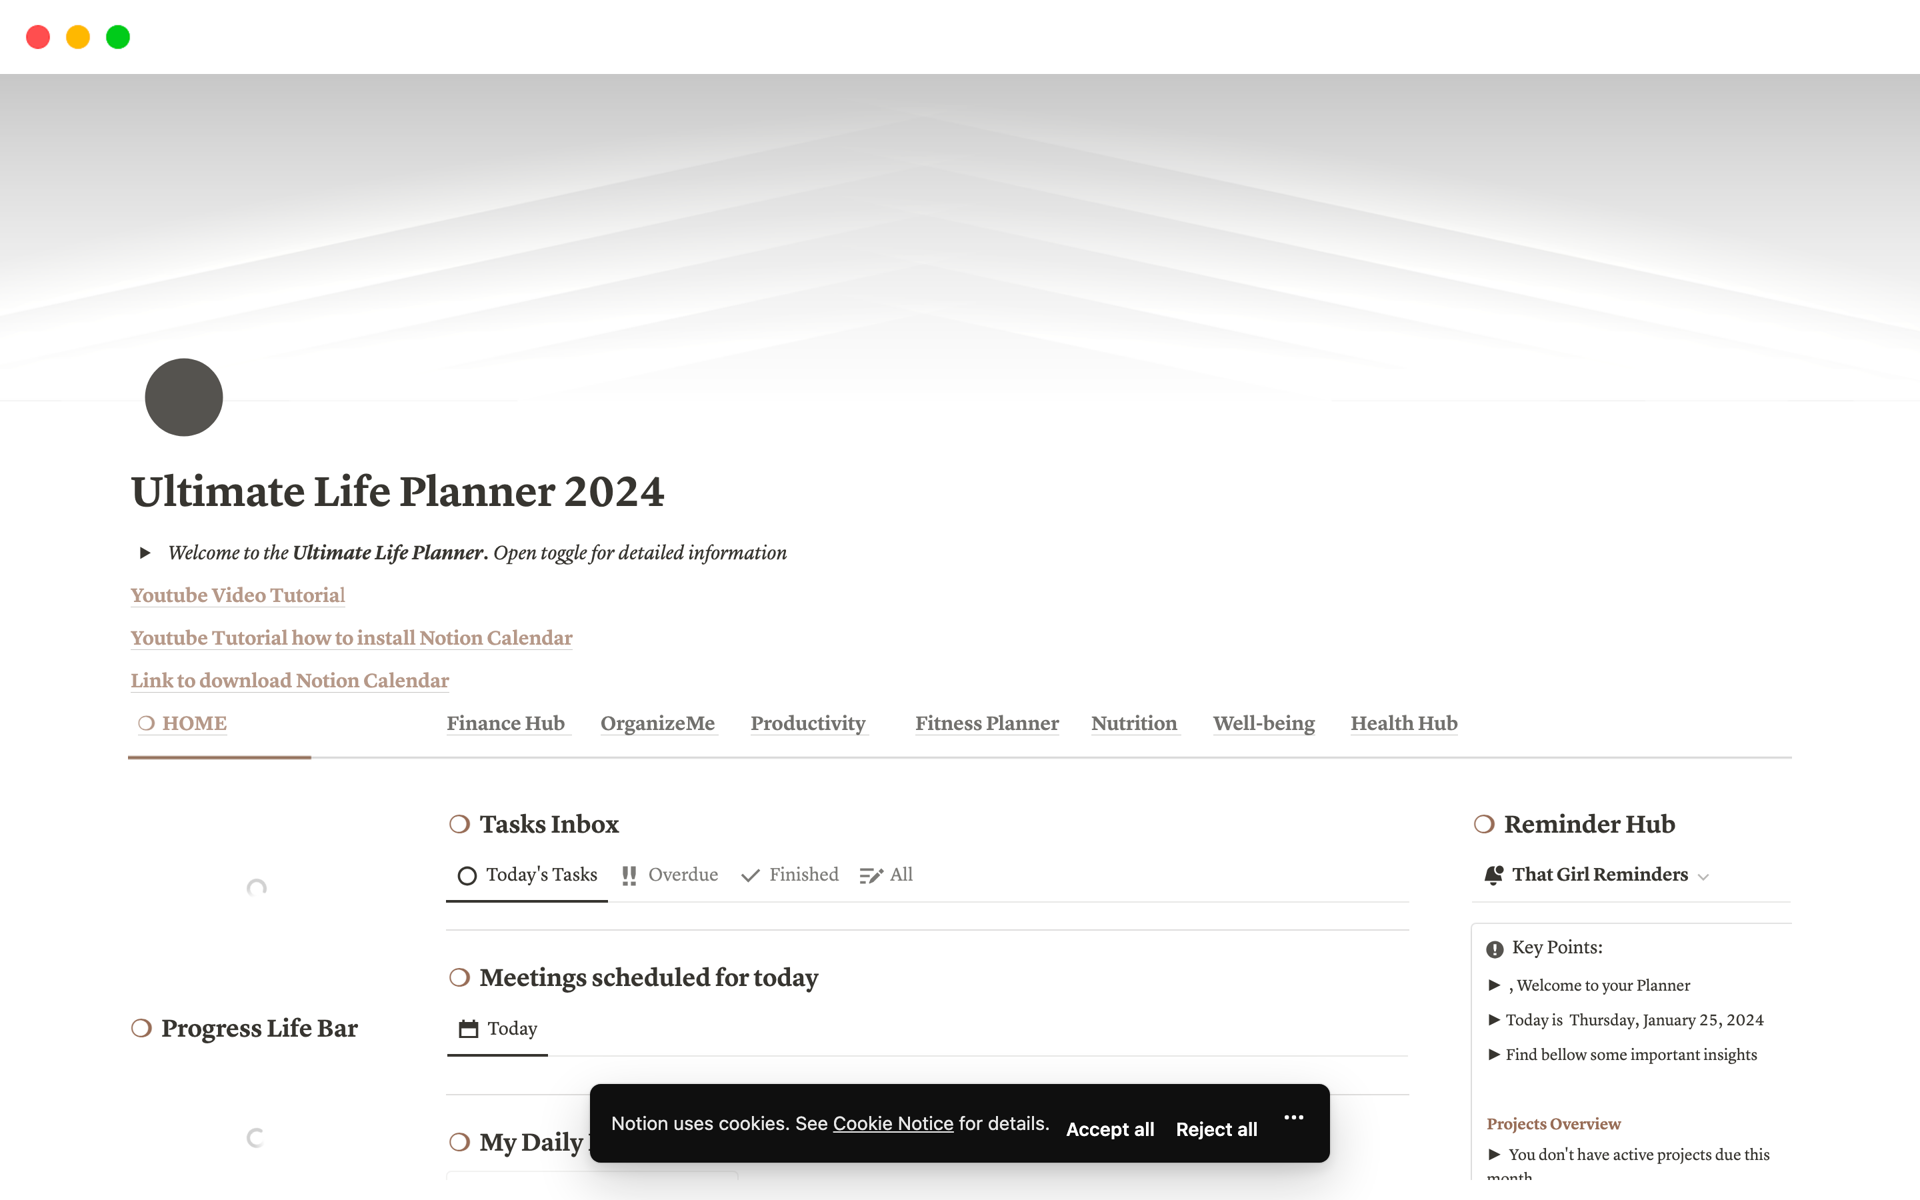 Revamp Your Life with the Ultimate Life Planner 2024 Notion Template – Always on the First Page!